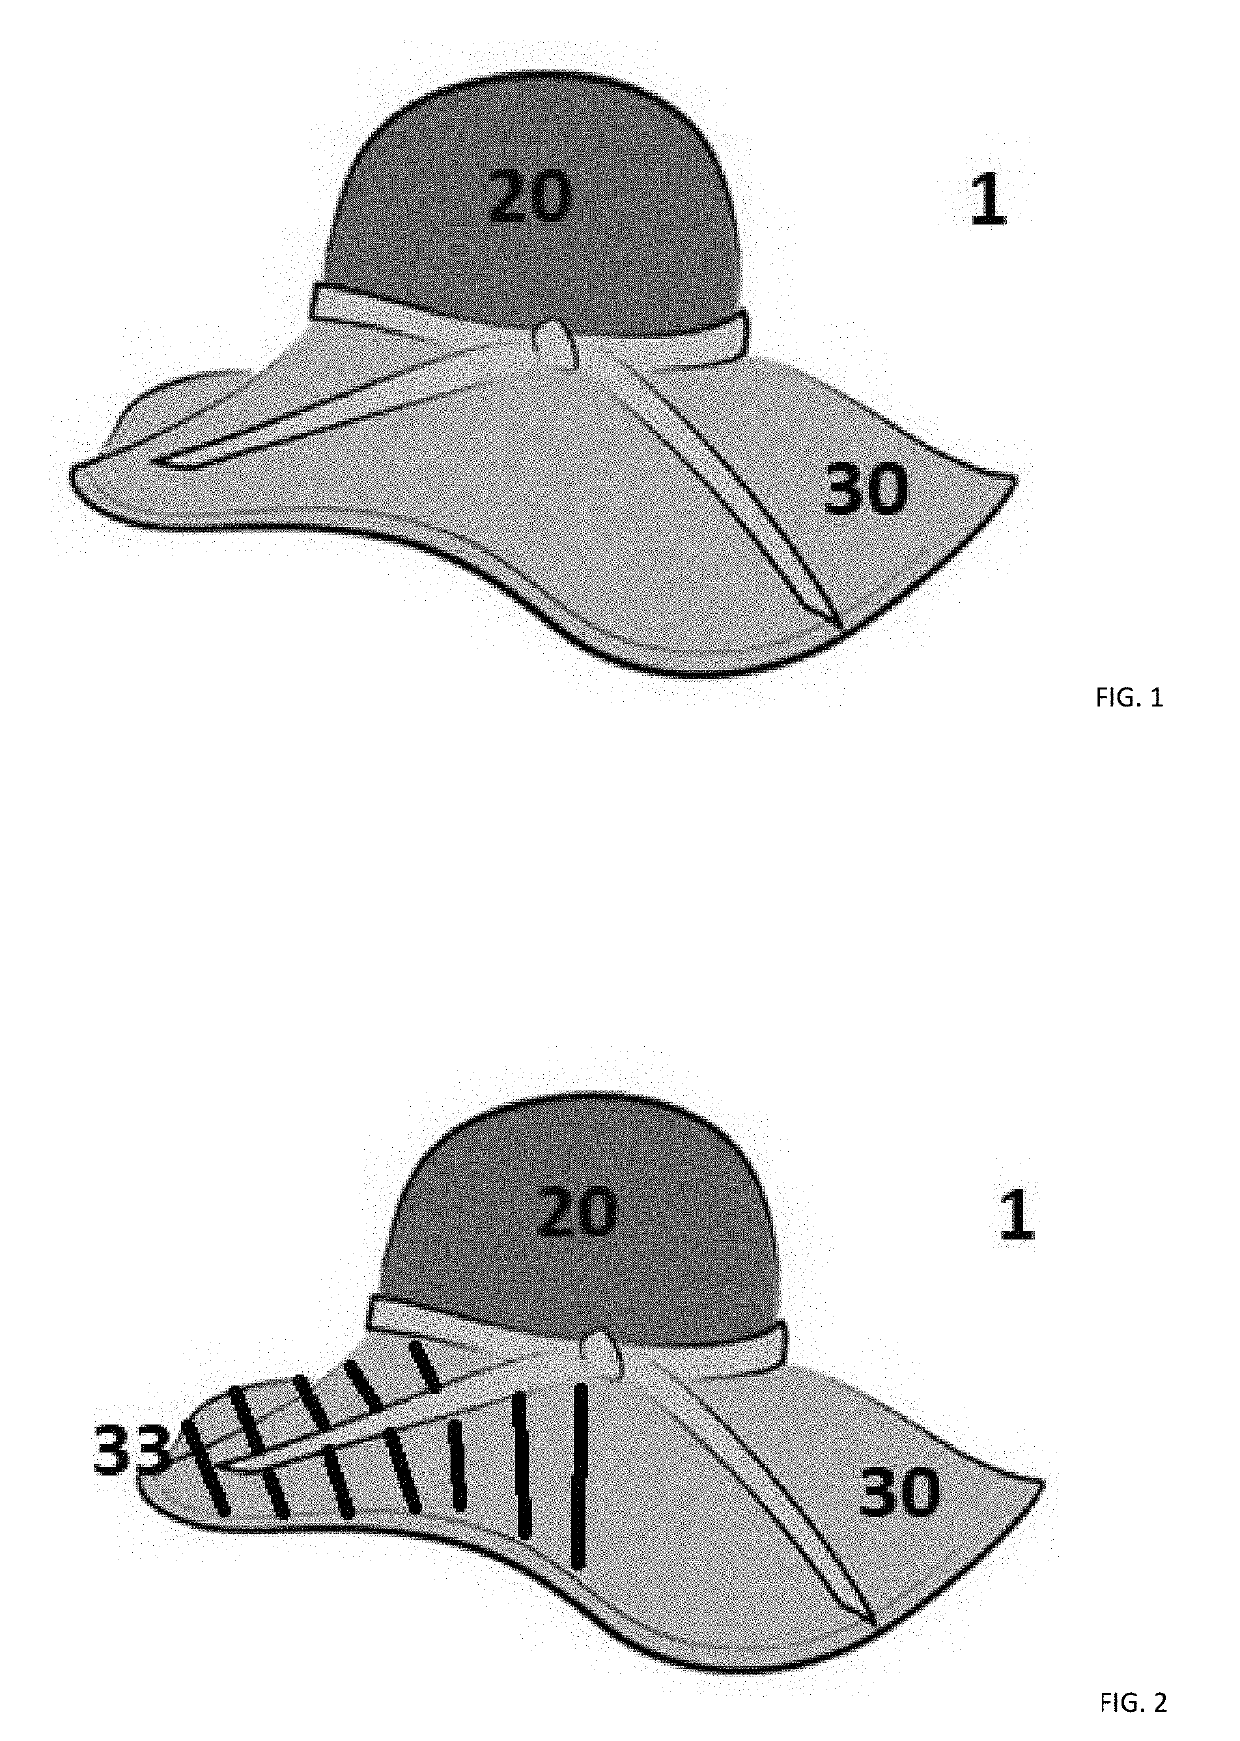 Hat or cap with UV protection